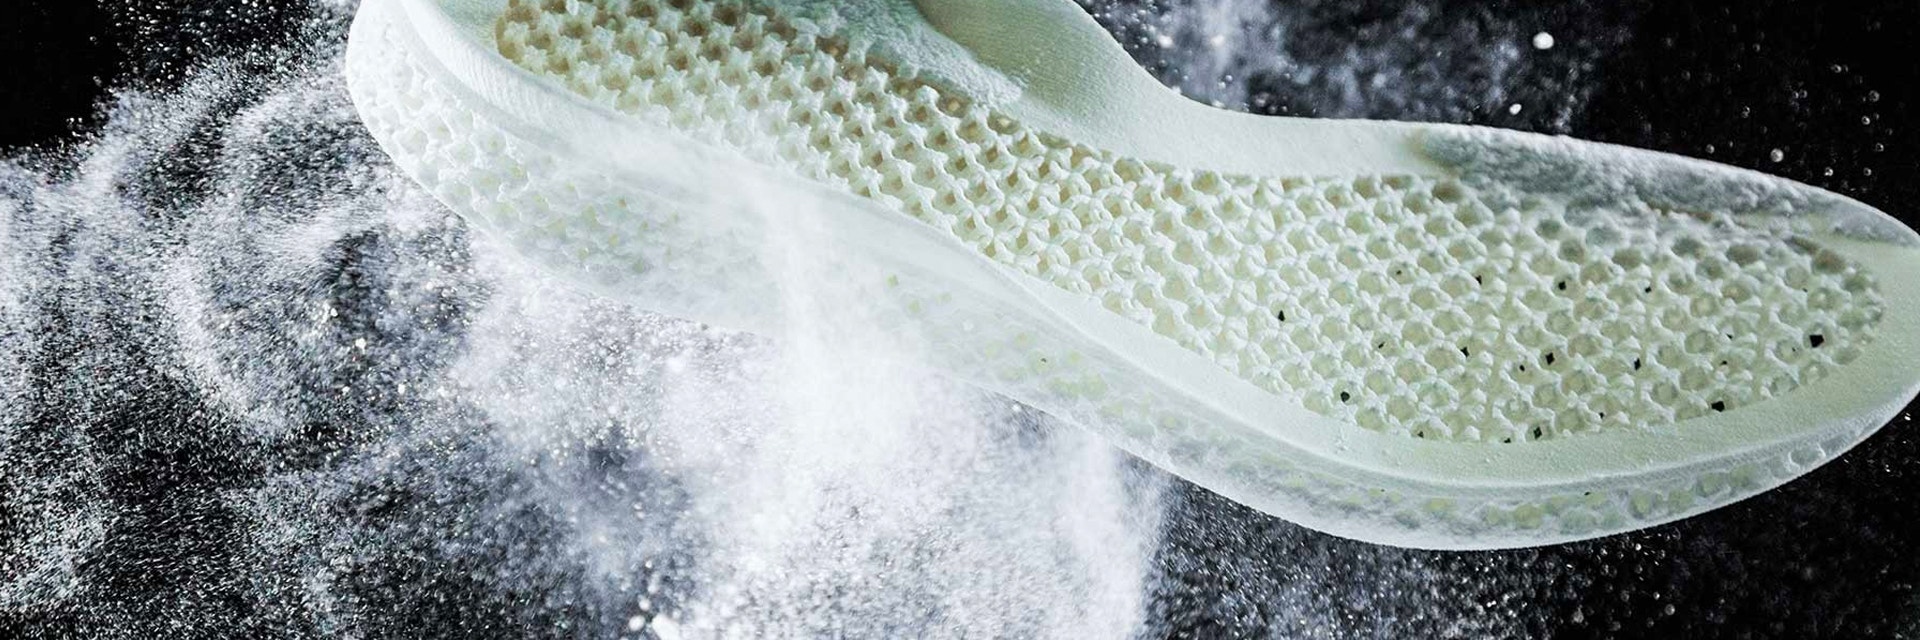 A 3D printed Adidas midsole is shown tossed up in mid-air surrounded by a cloud of white PA 12 powder. The midsole has a lattice structured base typical of laser sintering.